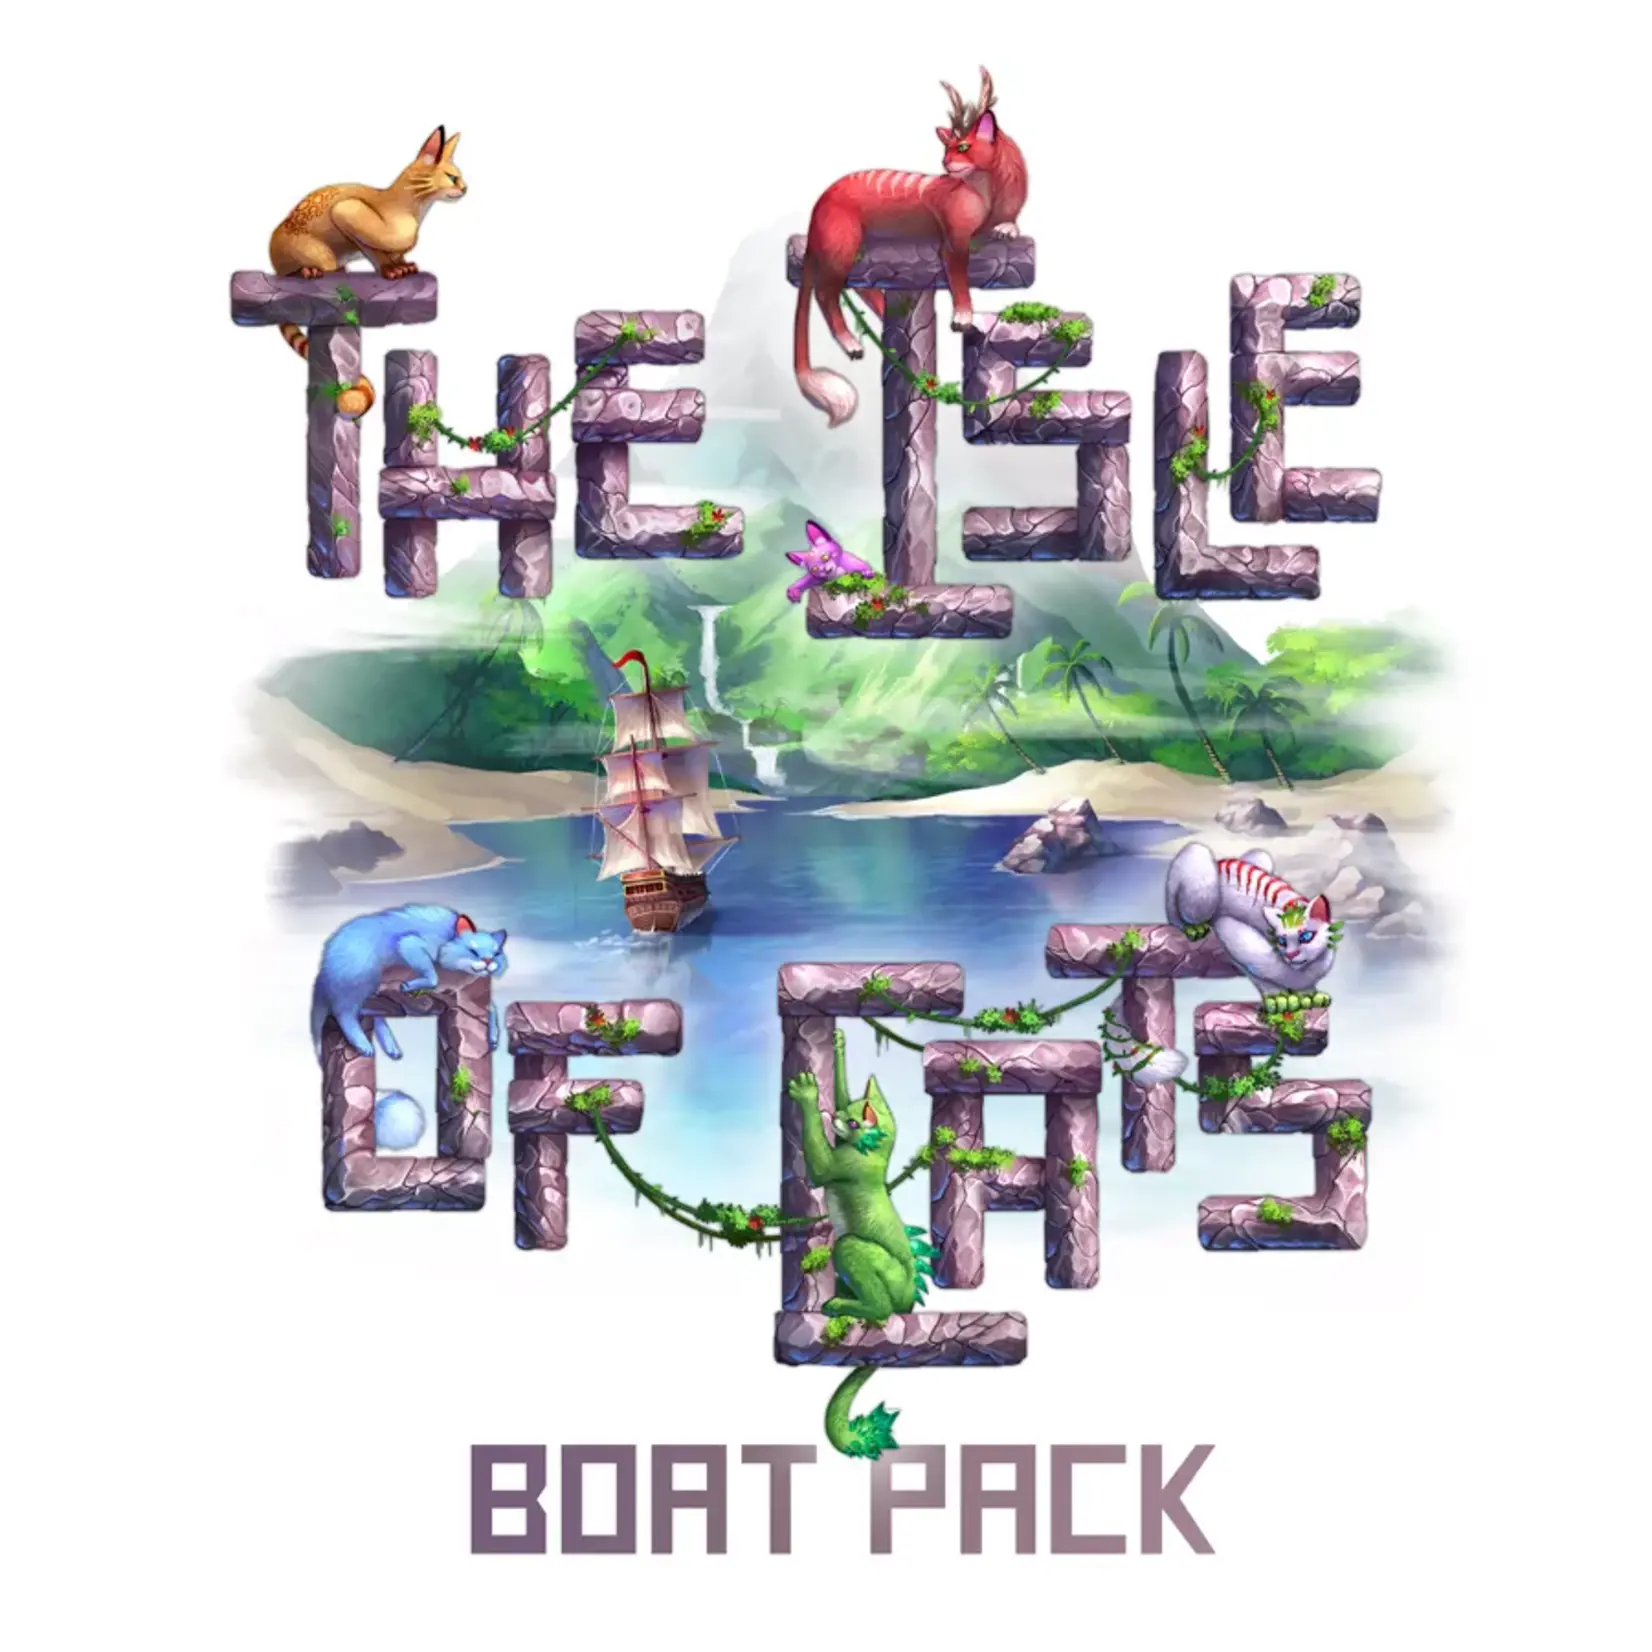 The City of Games THE ISLE OF CATS: BOAT PACK EXPANSION